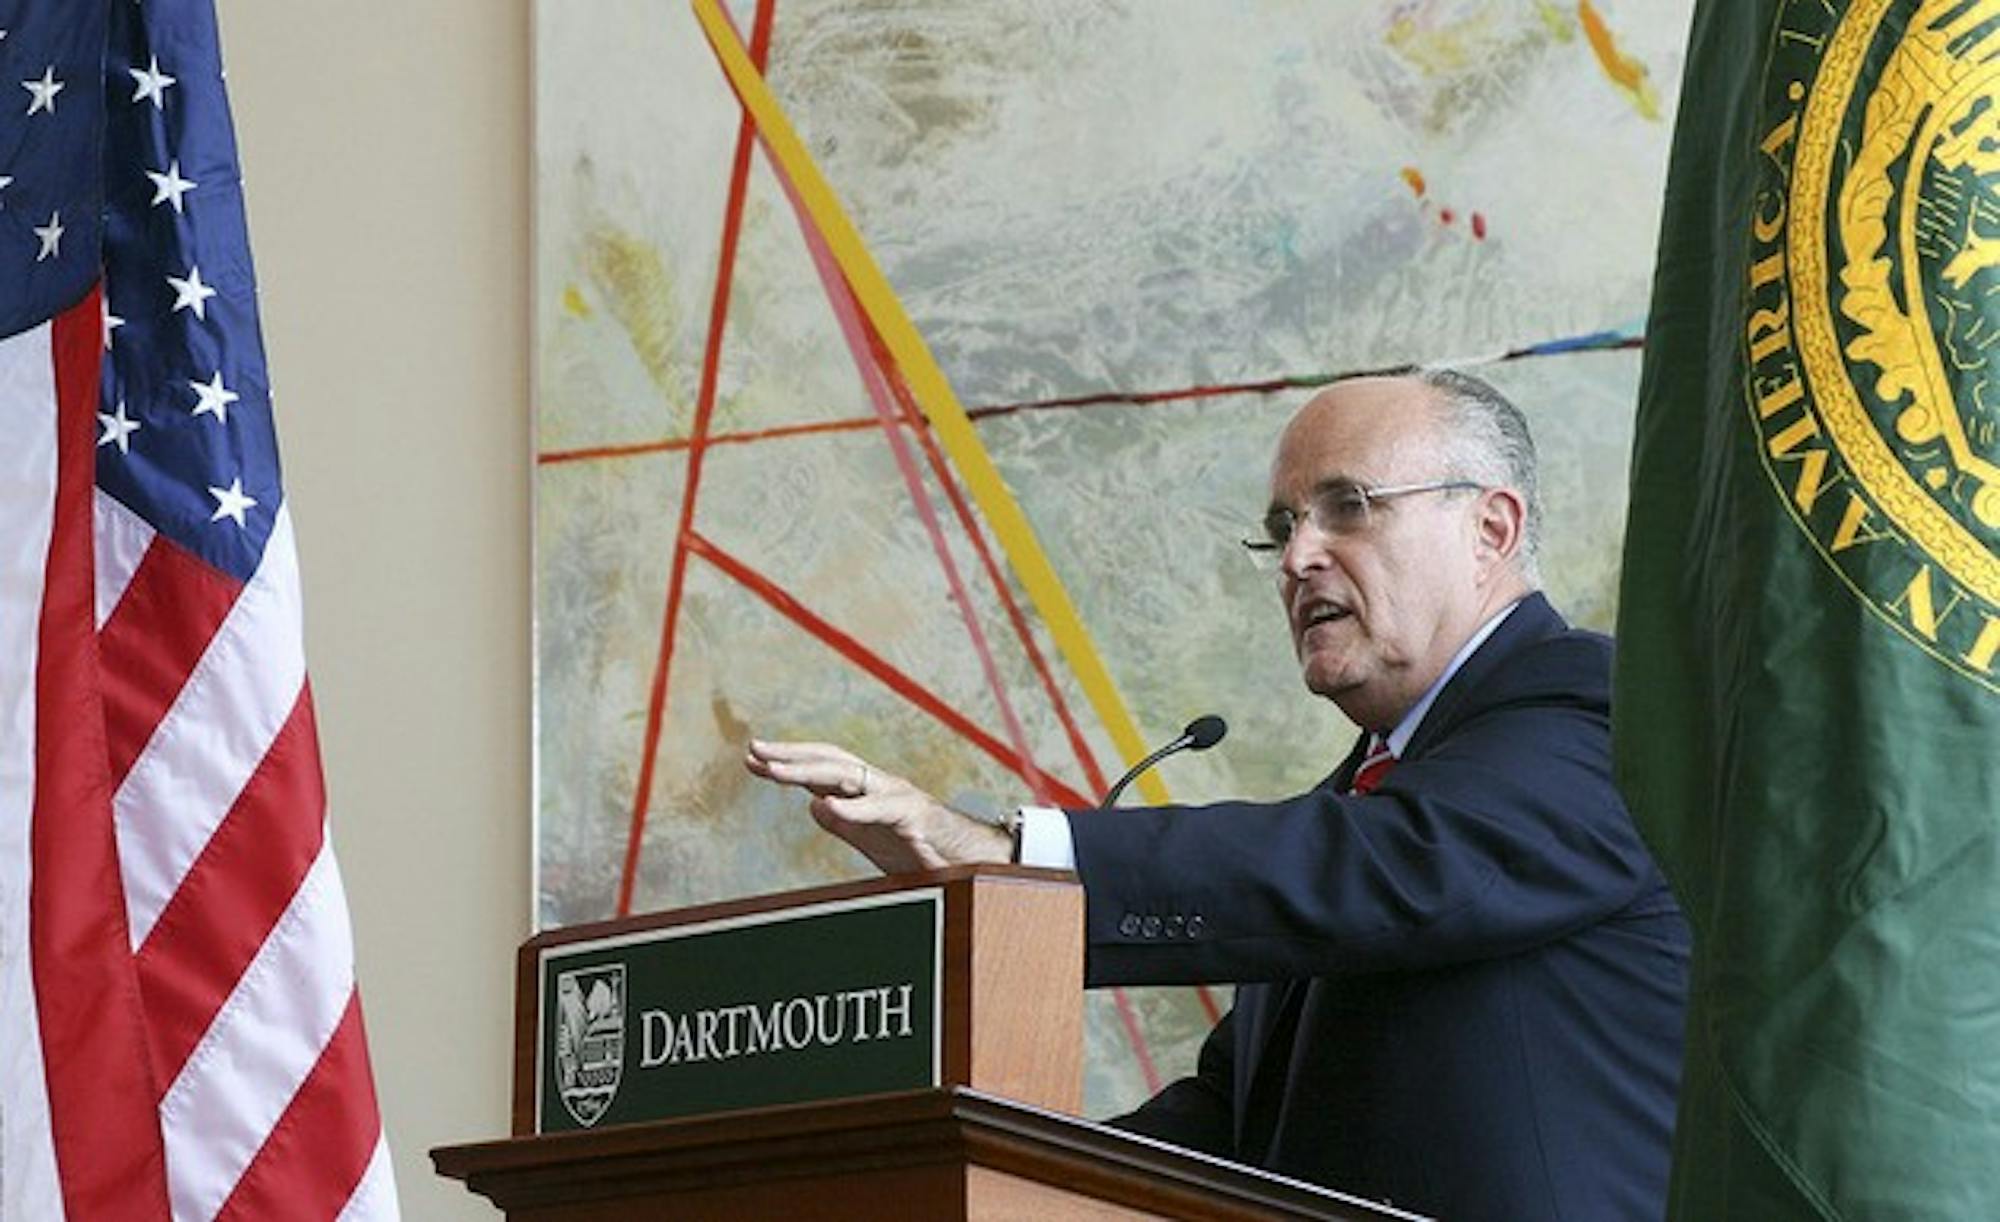 Former New York City Mayor Rudy Giuliani spoke on economic issues last Friday at the Top of the Hop.